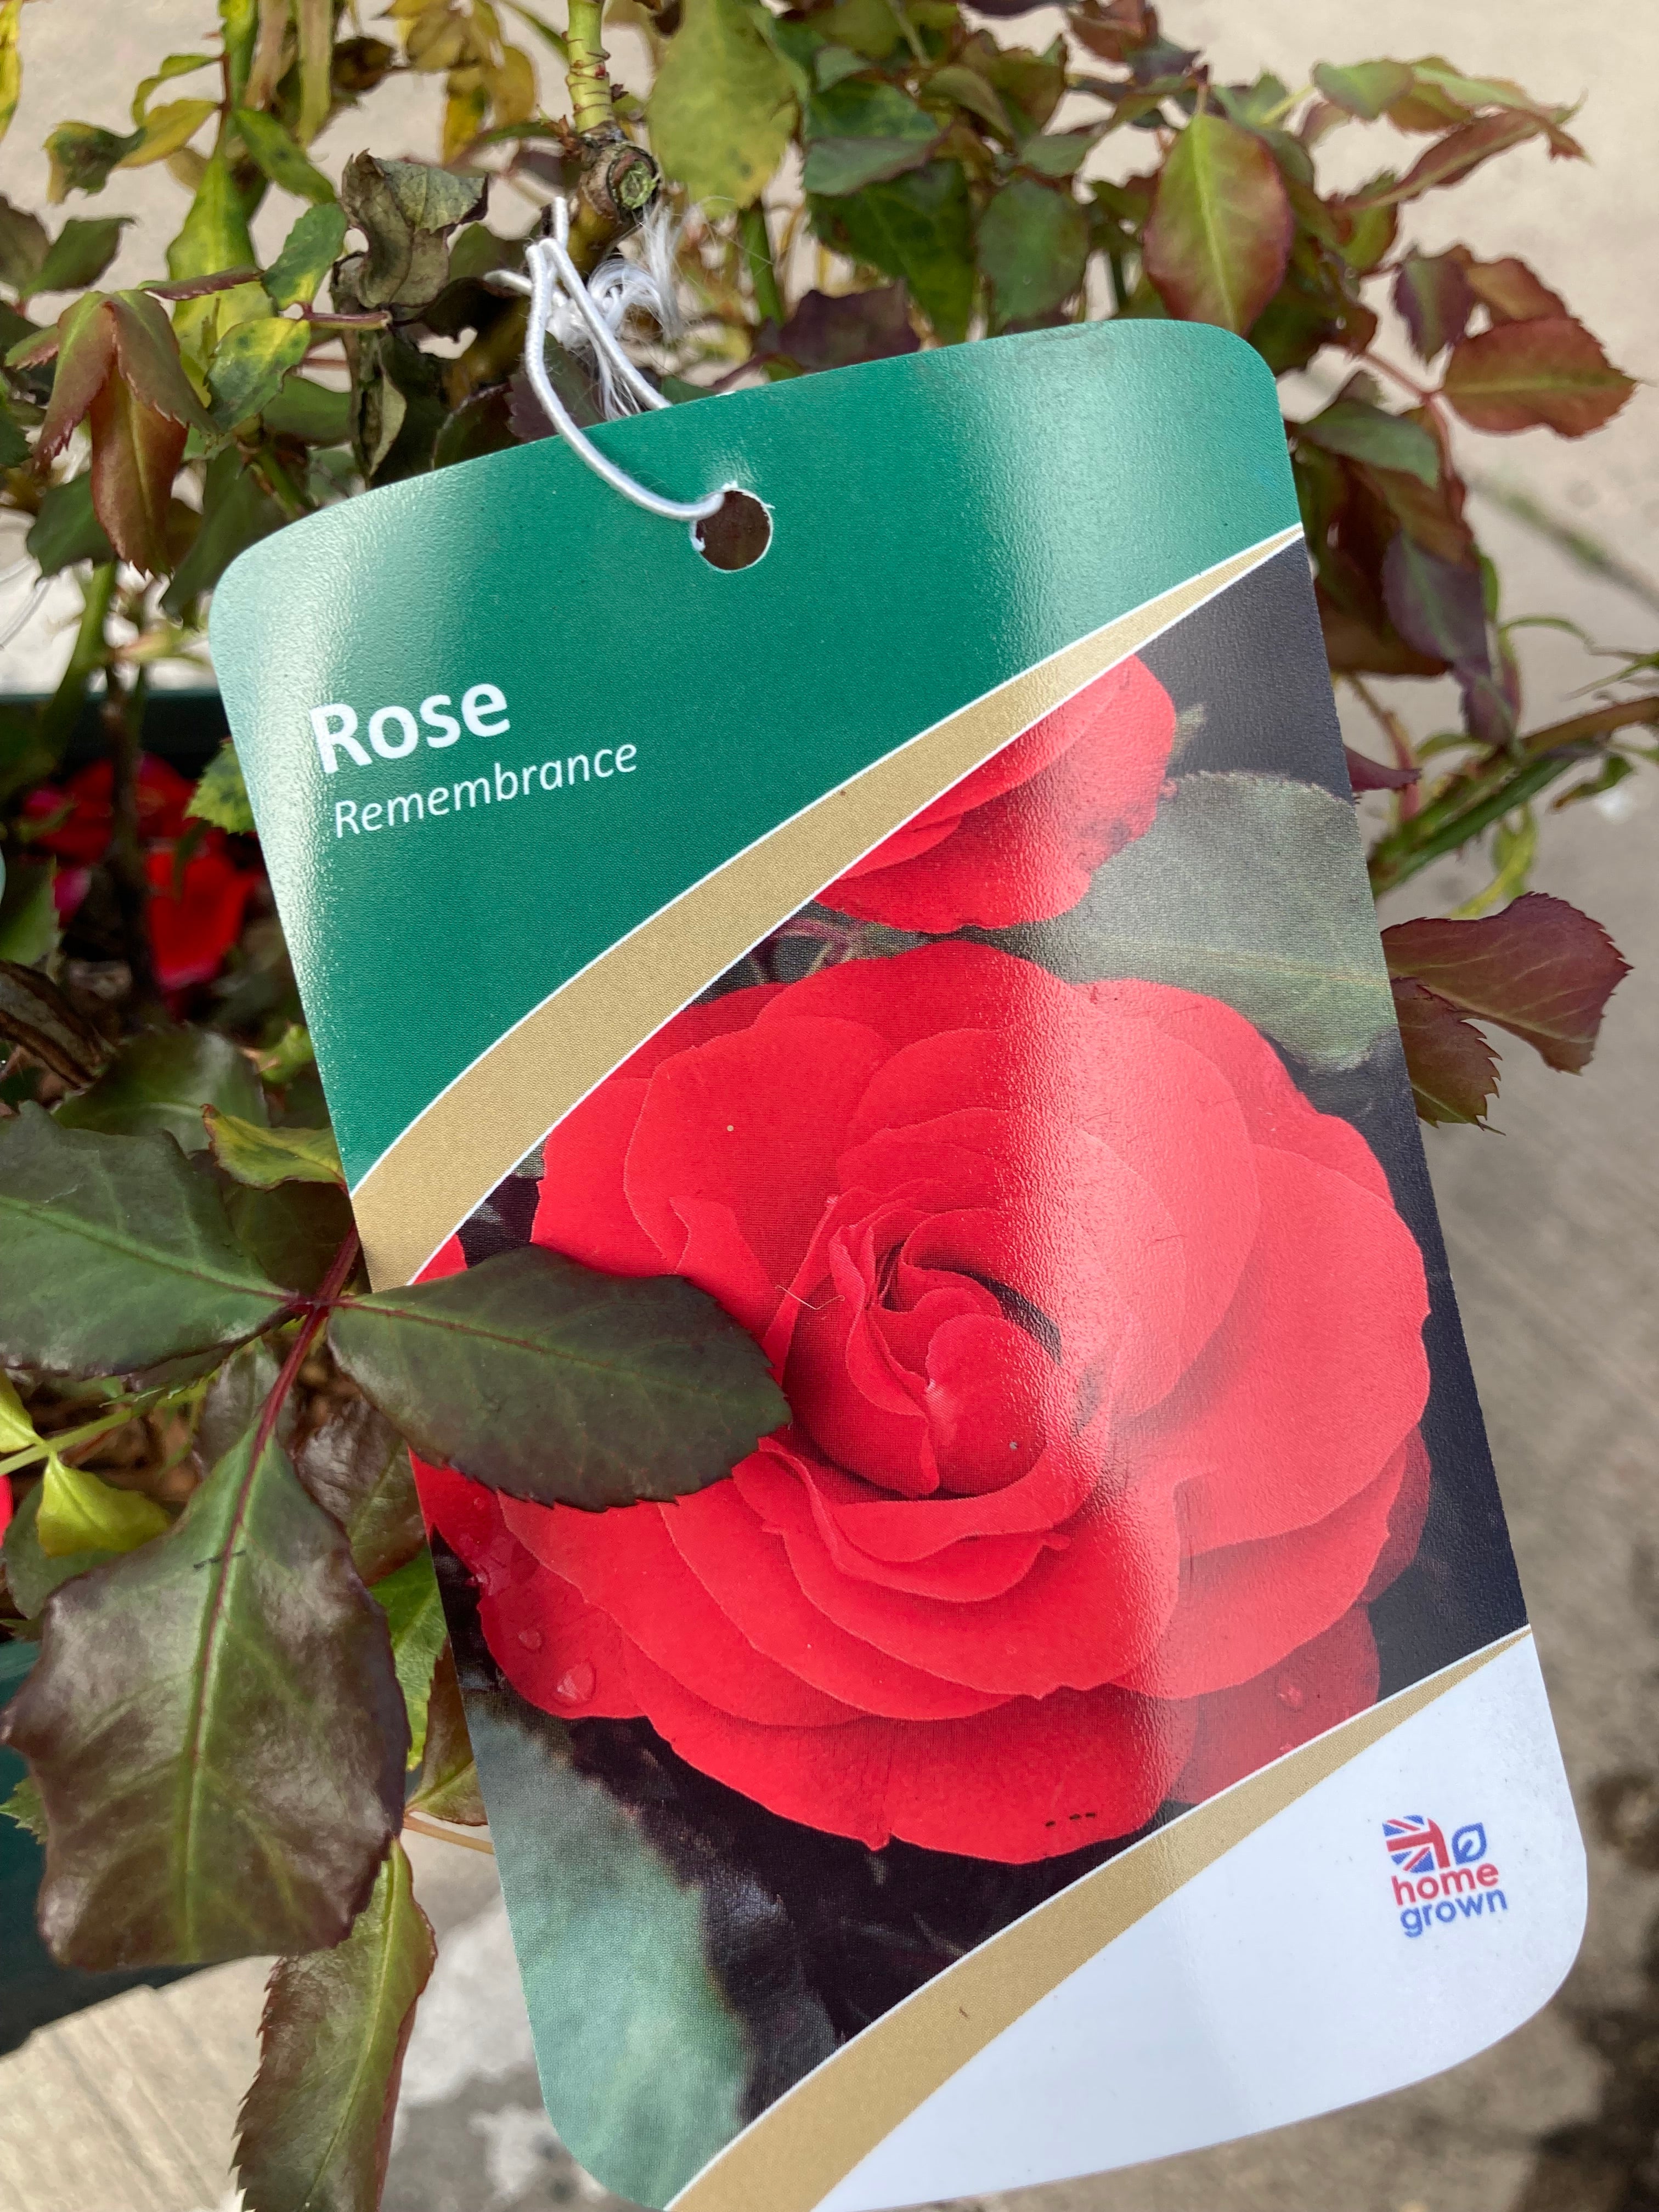 Red Rose Bush 'Remembrance' (Containerised 2 Litre Pot) Free UK Postage